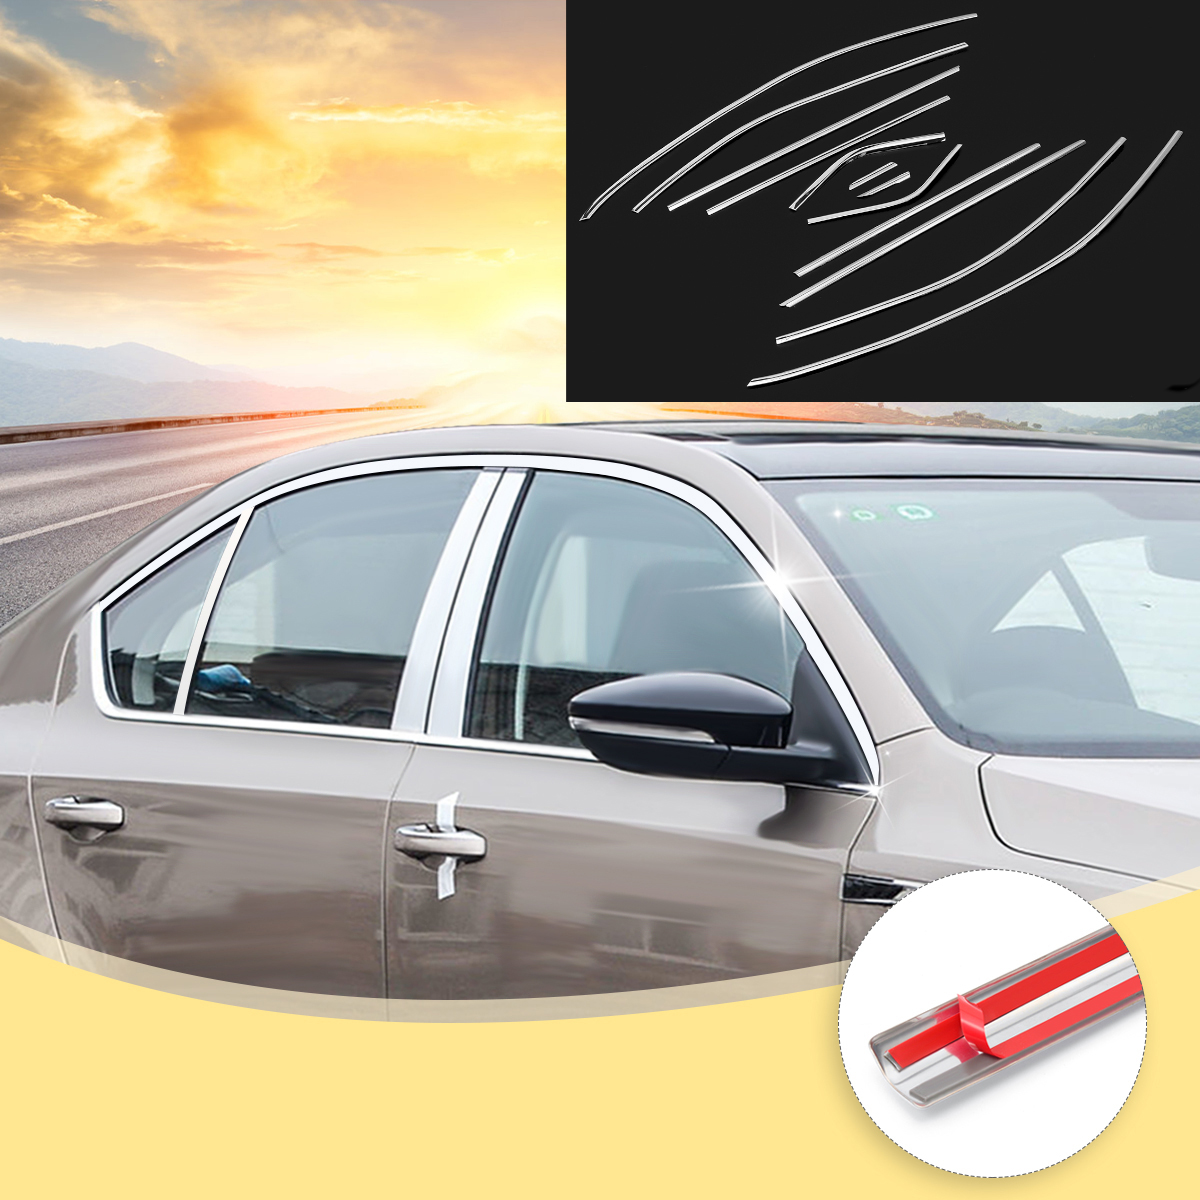 

Exterior Chrome Moulding Car Styling Stainless steel Top Bottom Window Trim Strip Cover For Skoda Octavia A7 2015-2017